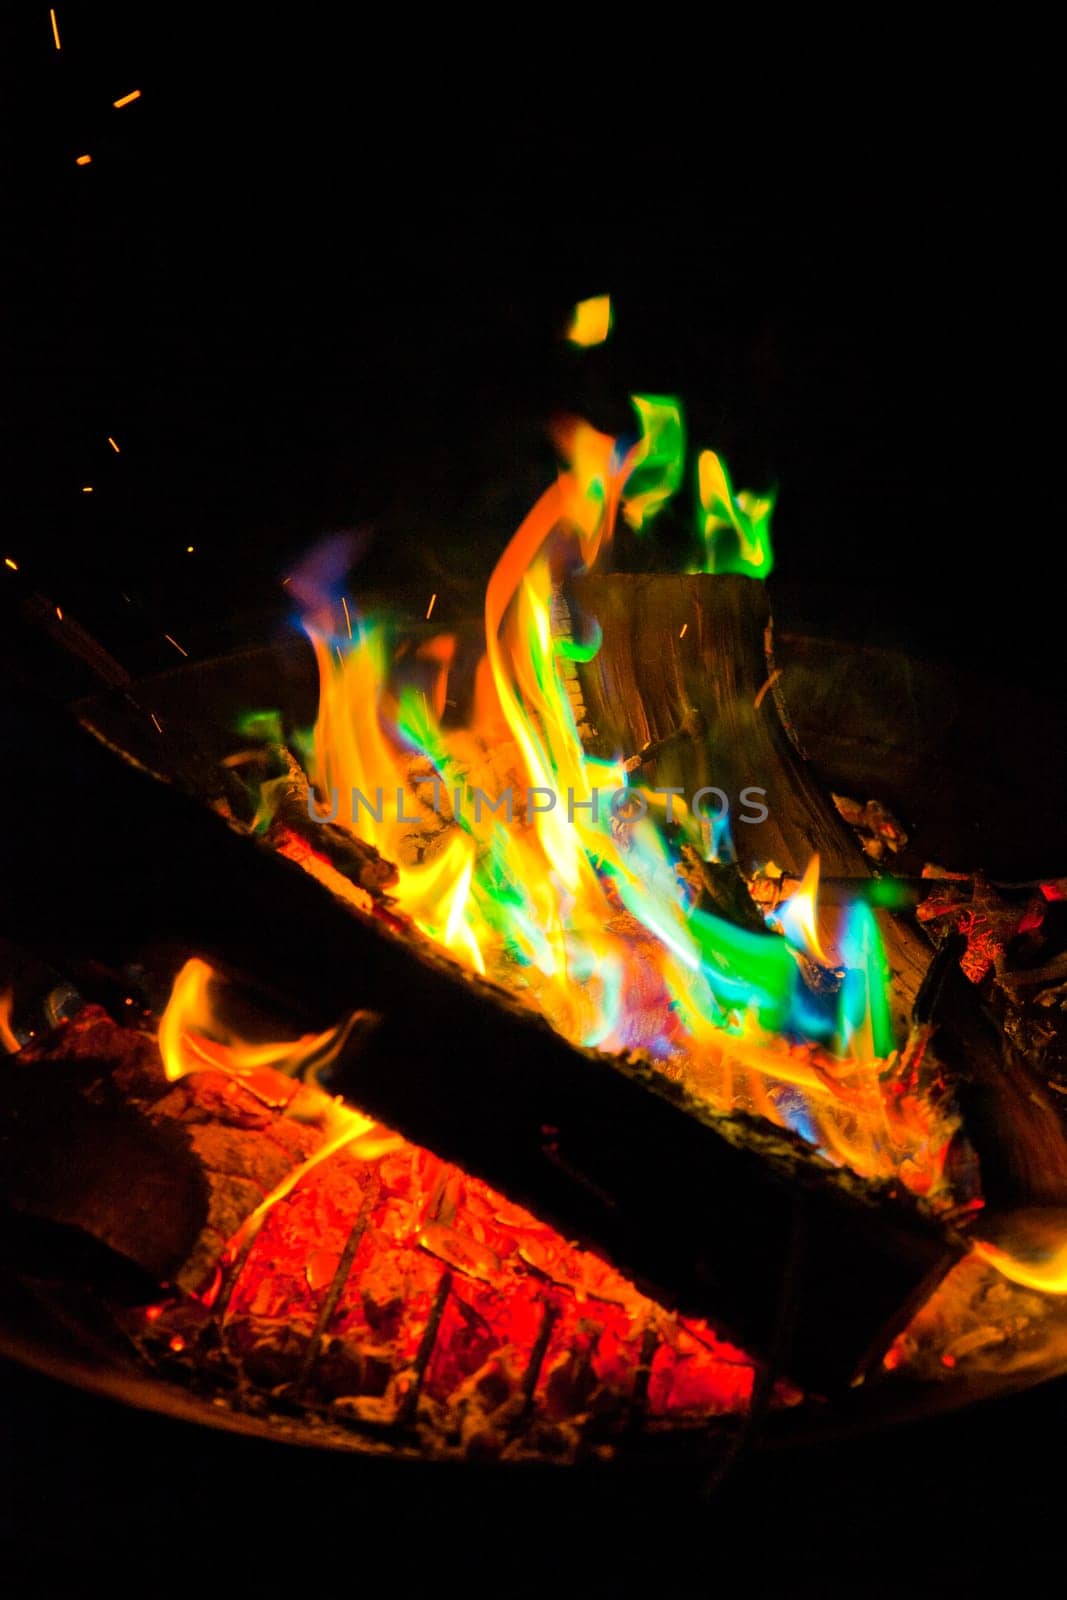 Vibrant Campfire with Multicolored Flames in Indiana Night by njproductions